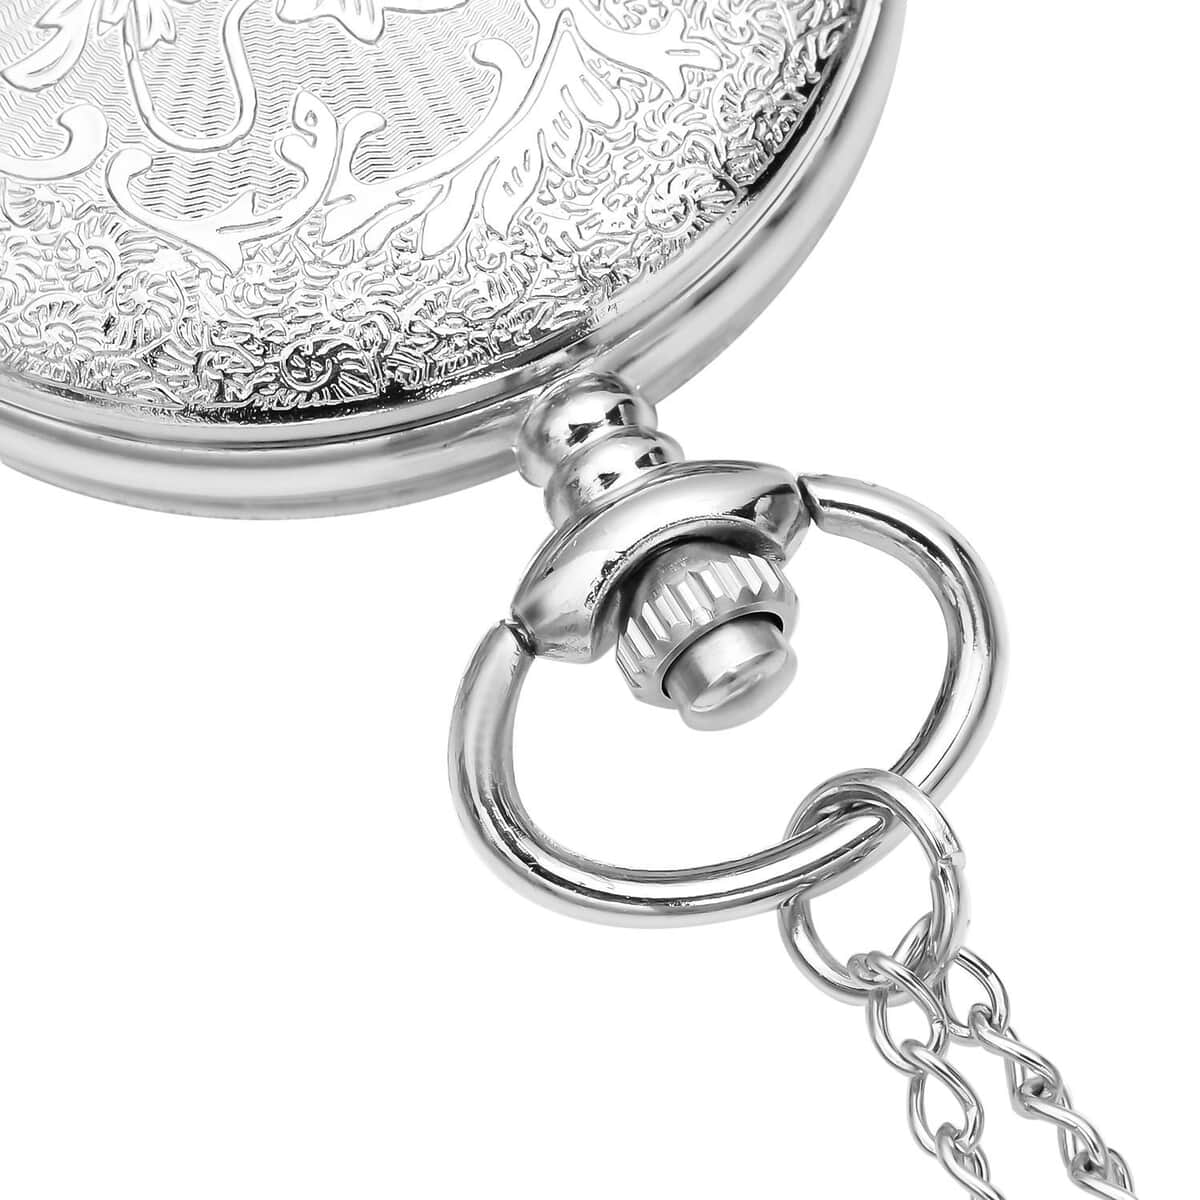 Strada Japanese Movement American Flag & Fireworks Pattern Pocket Watch with Chain (up to 31 Inches) image number 5